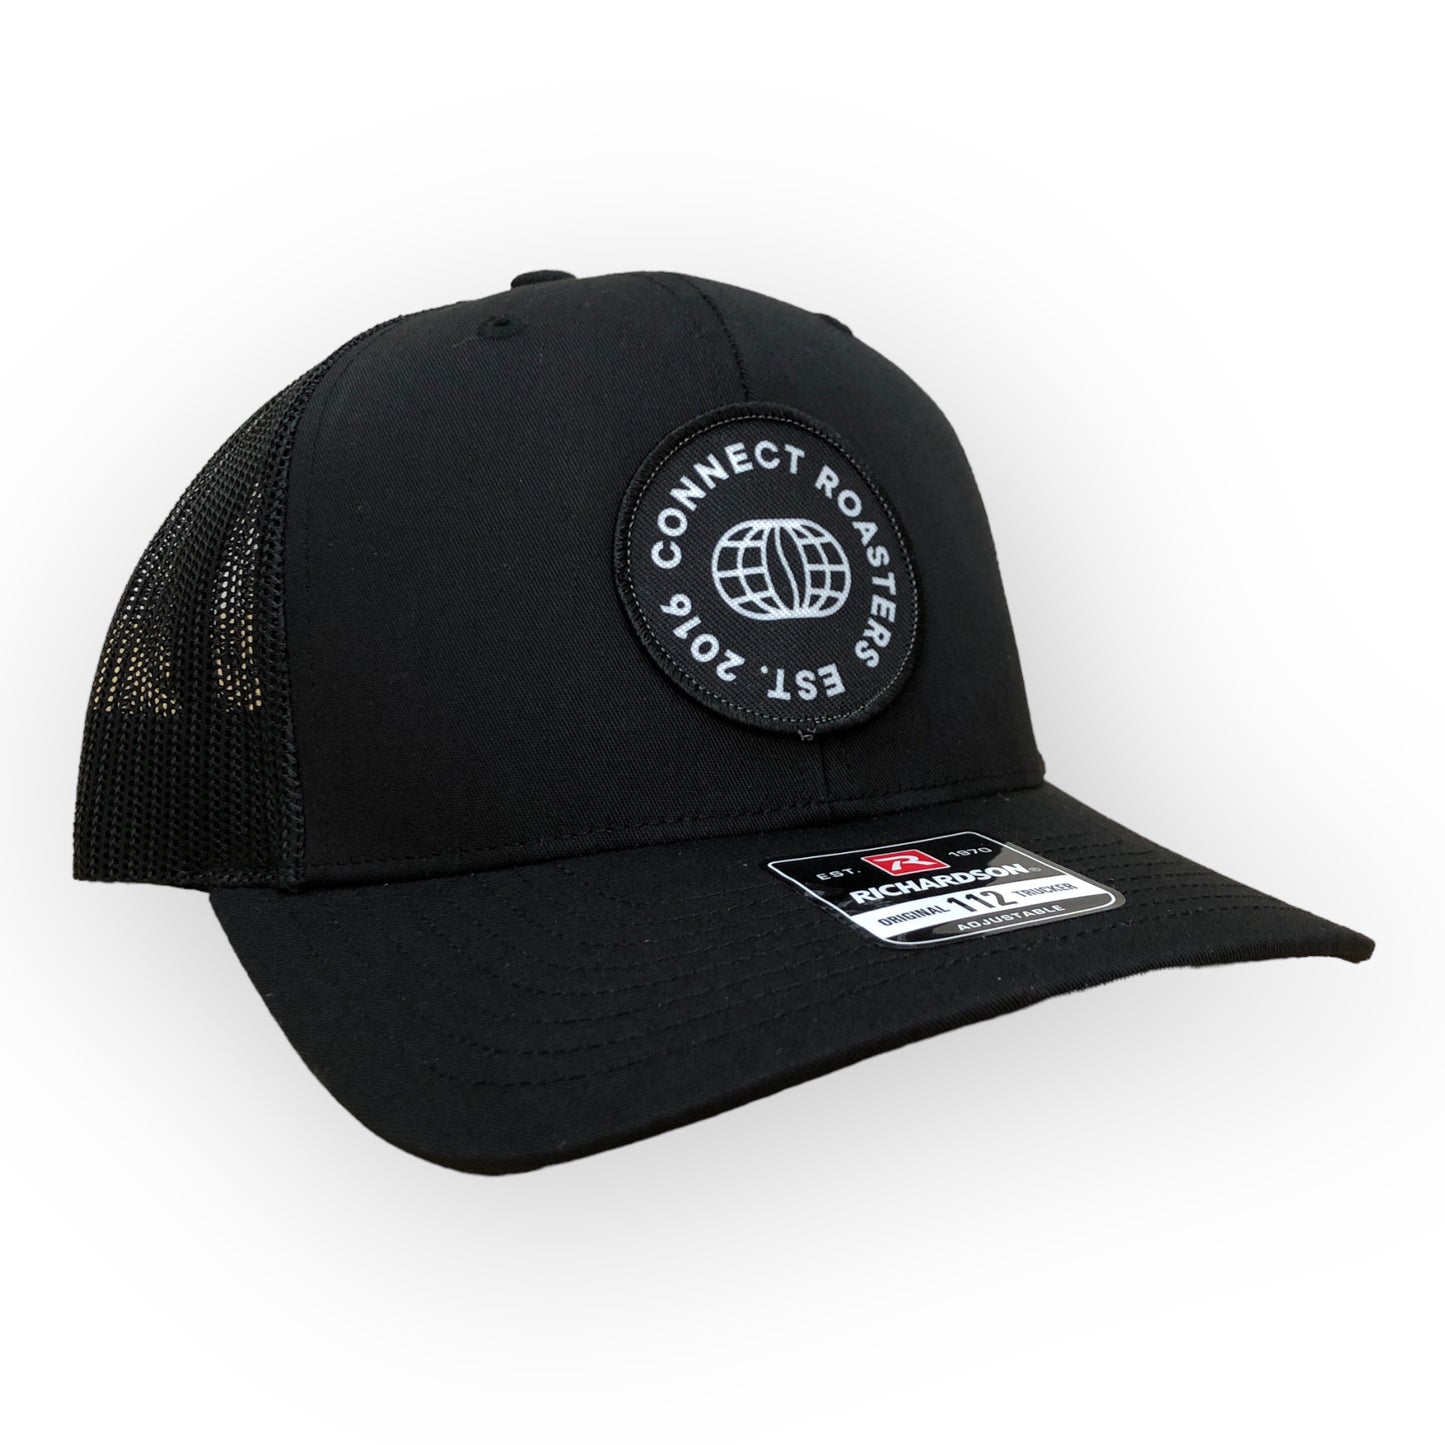 Connect Roasters Snapback Hat